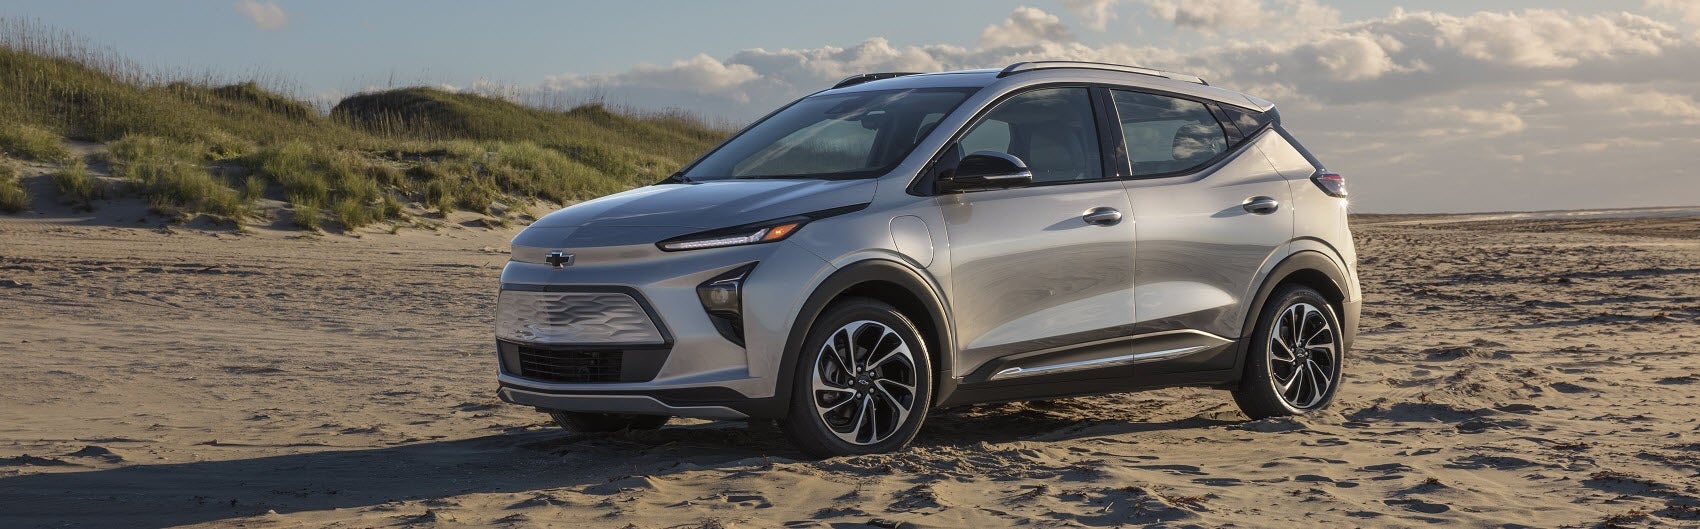 2021 Chevy Bolt parked on scenic beach